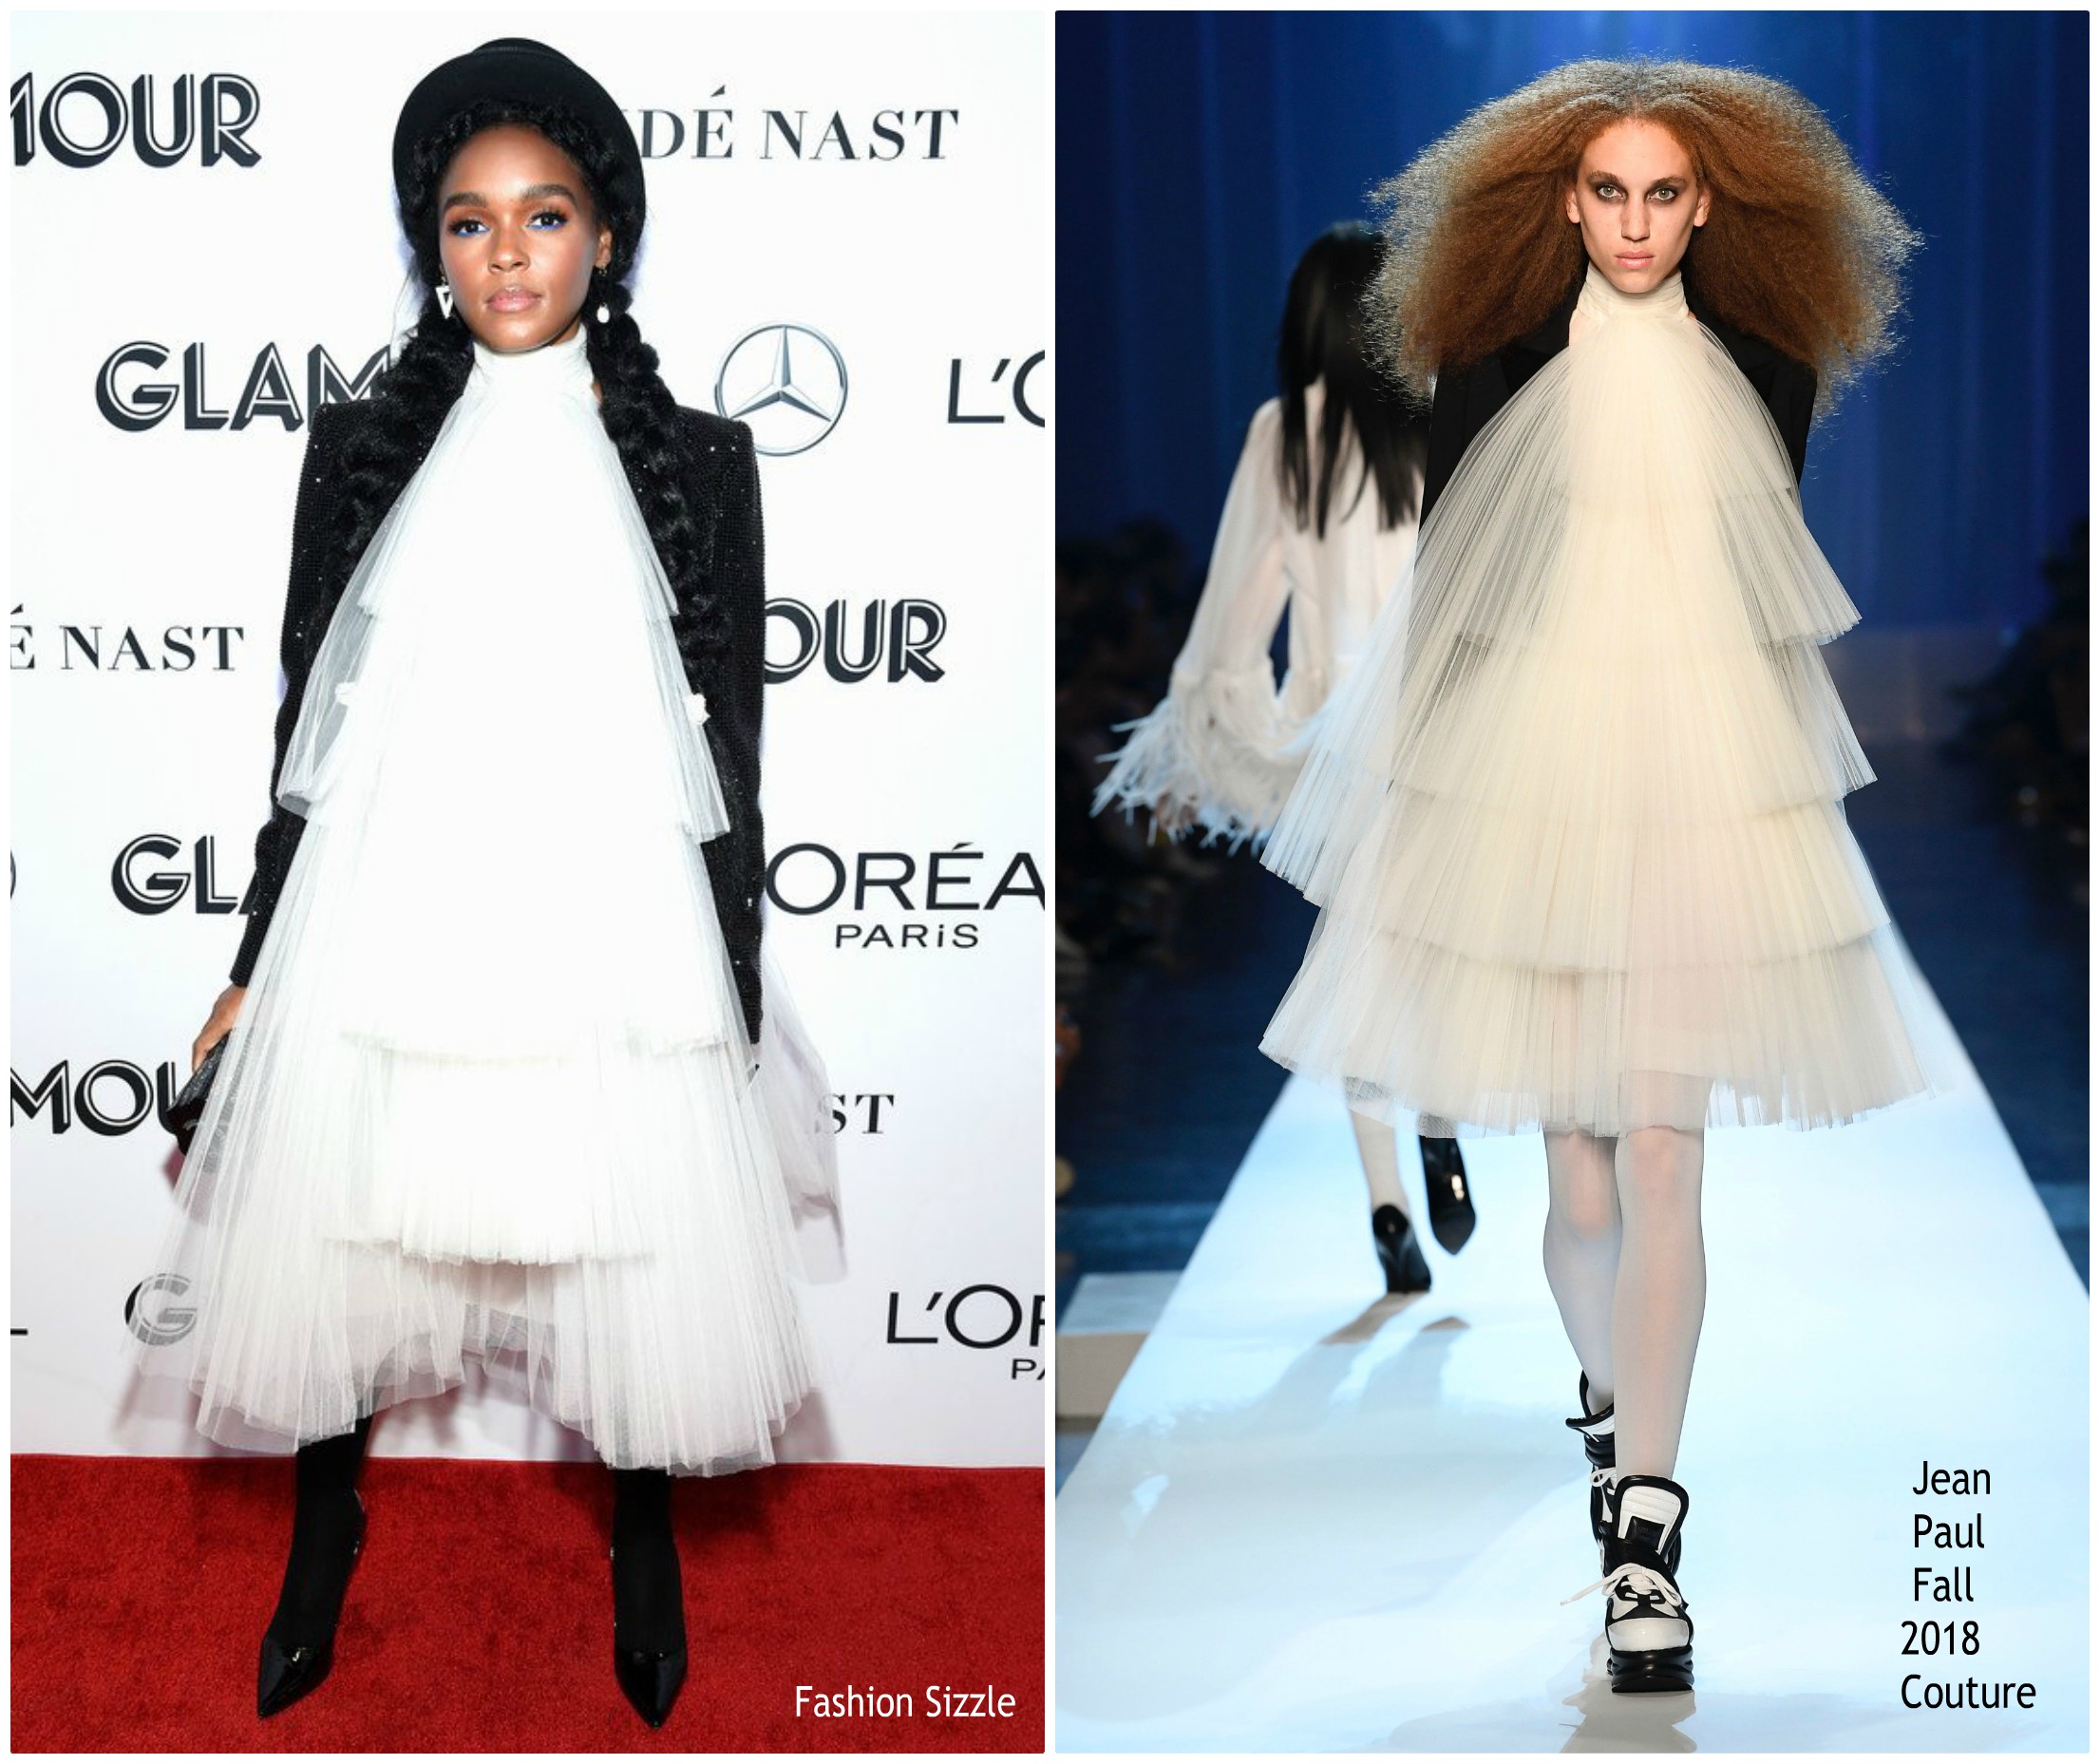 Janelle Monáe In Jean Paul Gaultier Haute Couture  @ 2018 Glamour Women of the Year Awards